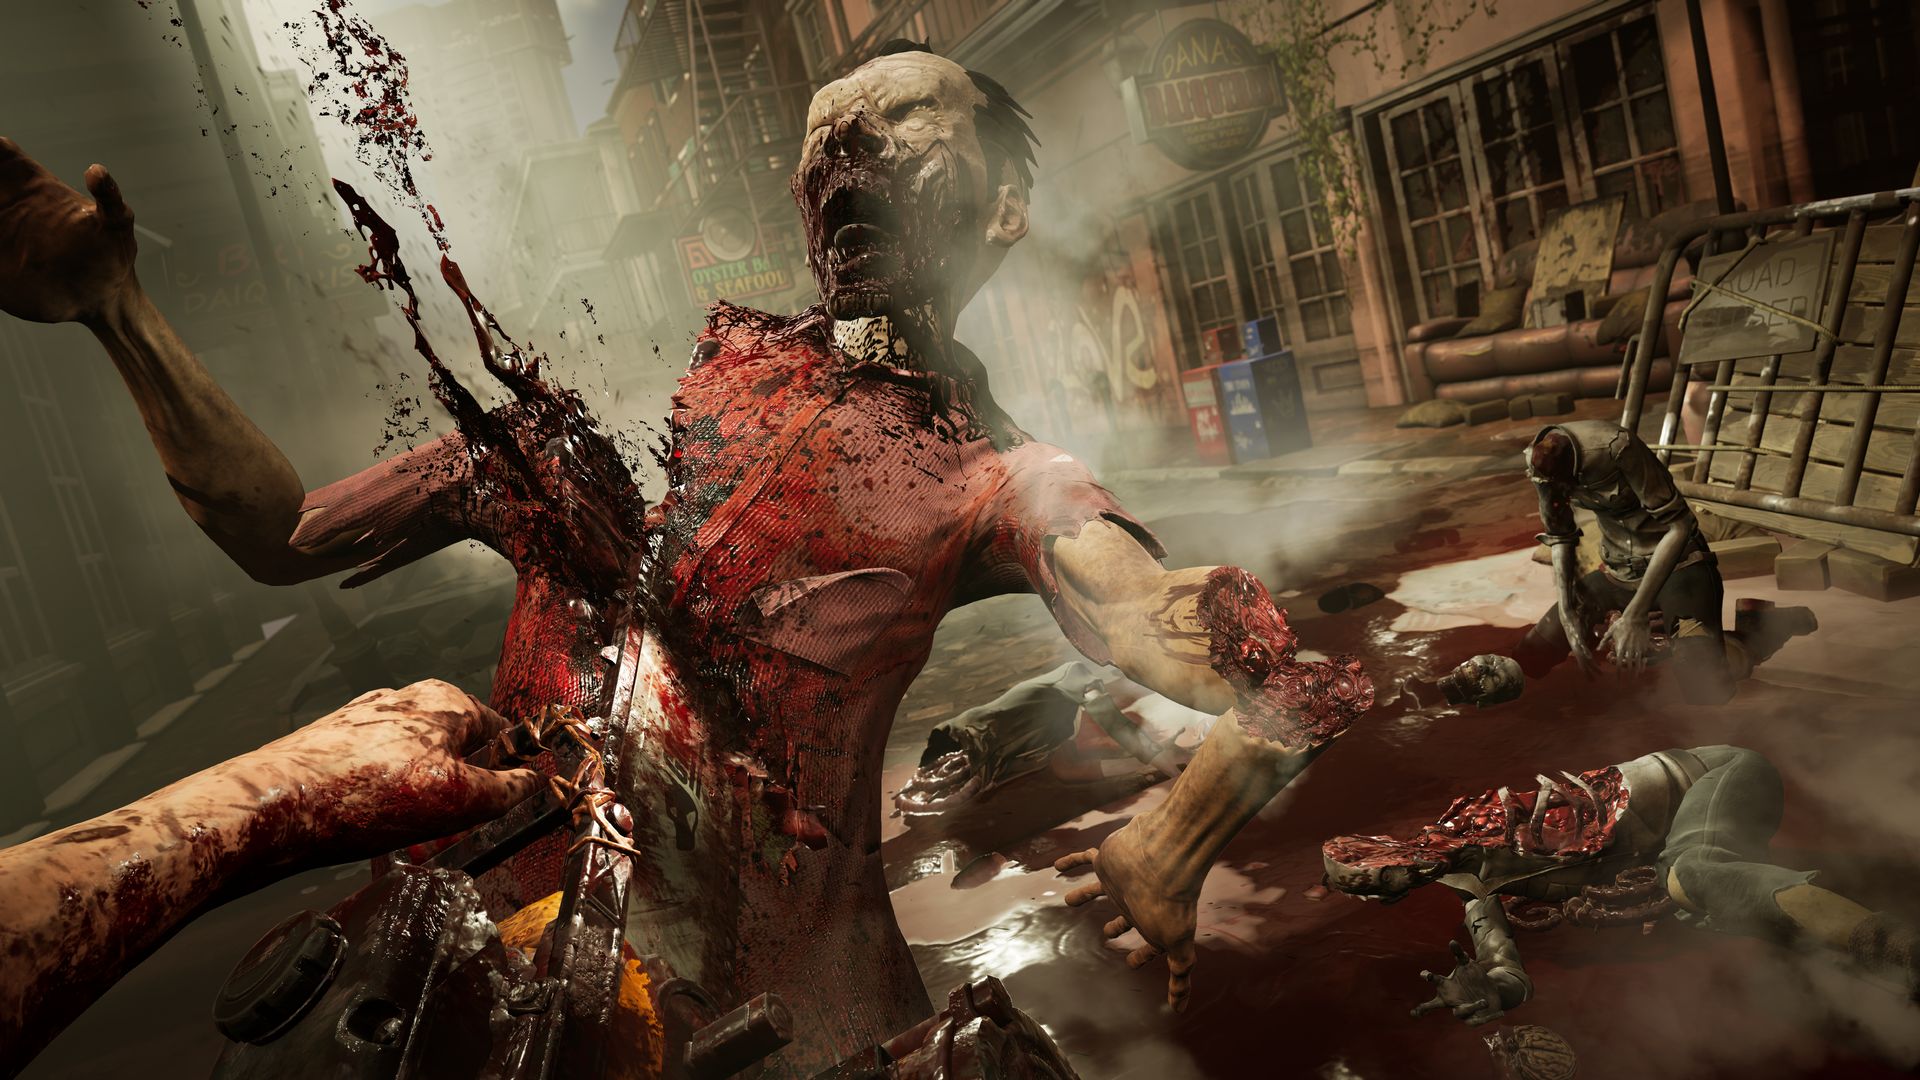 Zombies: Can You Kill the Undead?